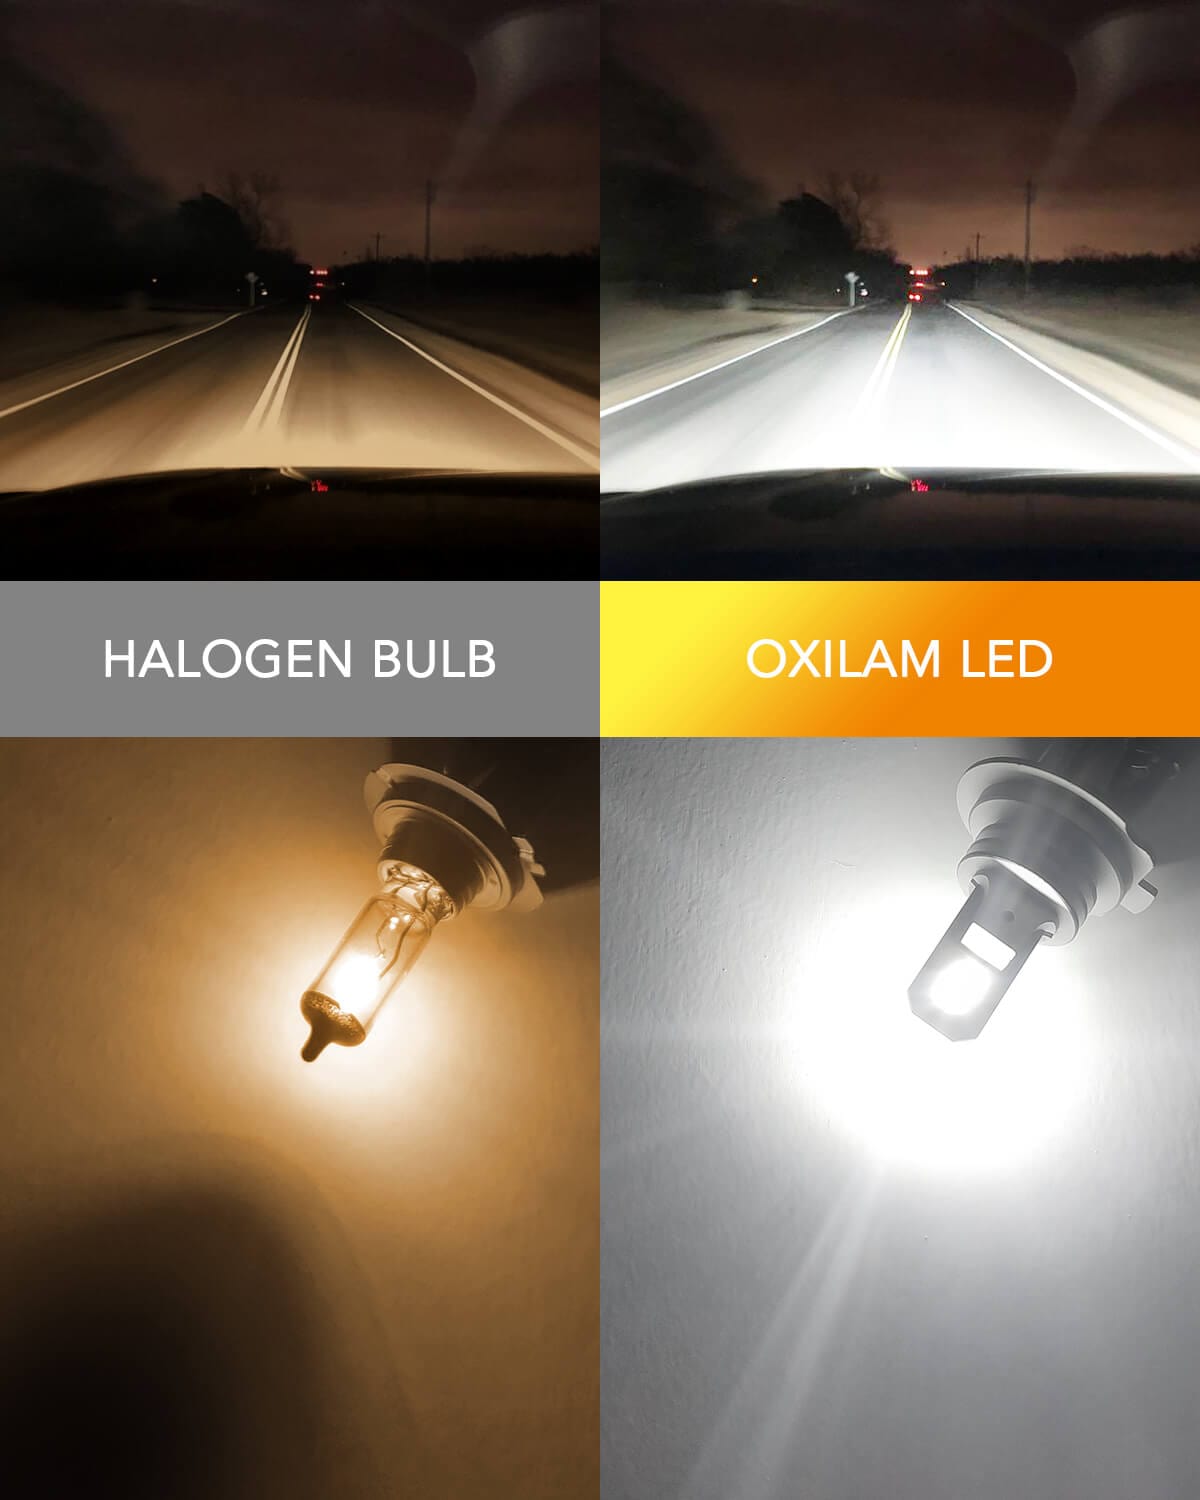 OXILAM H7 LED Headlight Bulbs, CSP LED Chips 6500K Cool White, 1:1 Mini  Size No Adapter Required